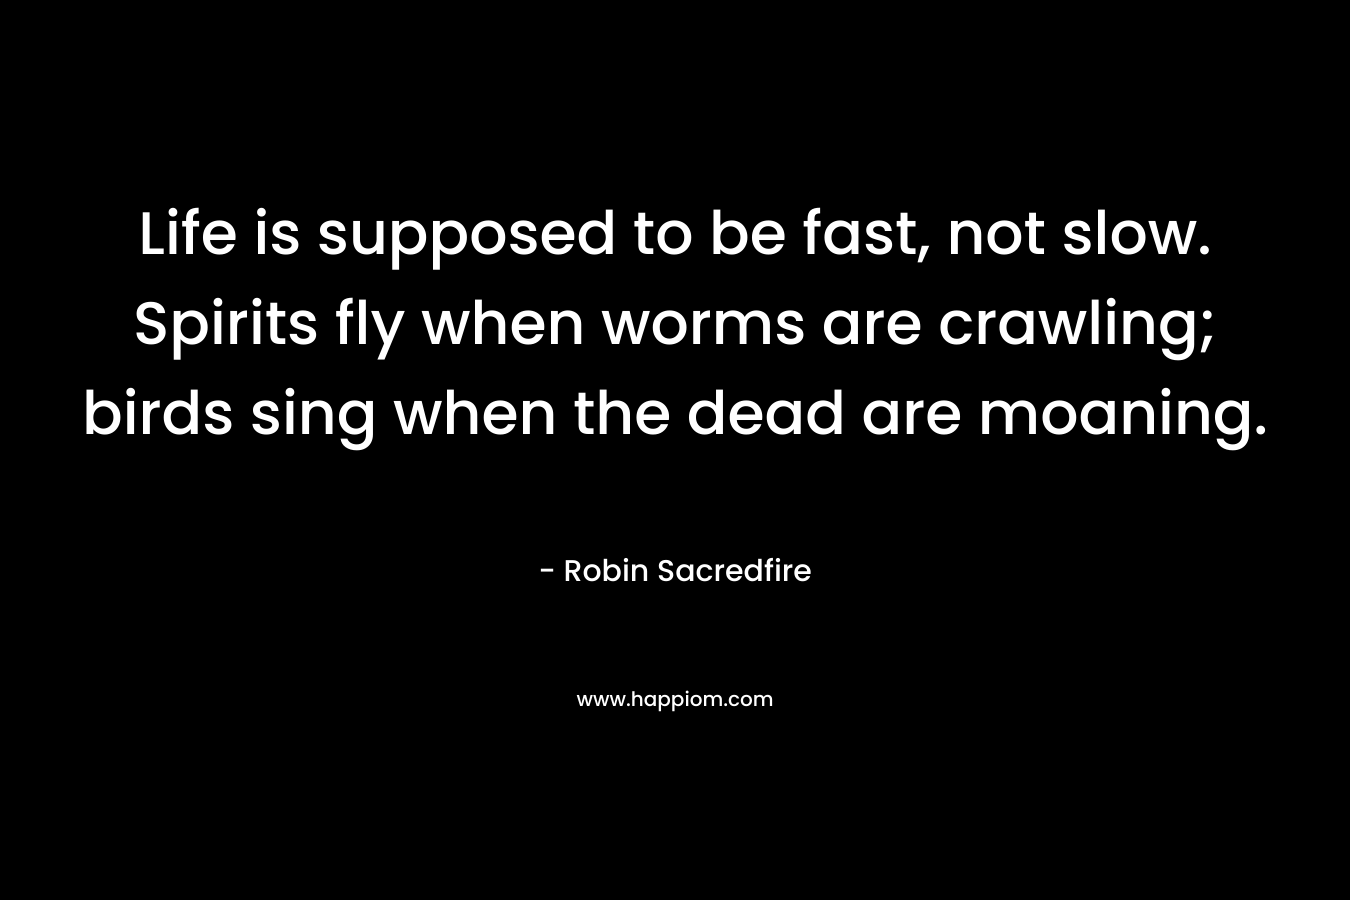 Life is supposed to be fast, not slow. Spirits fly when worms are crawling; birds sing when the dead are moaning. – Robin Sacredfire